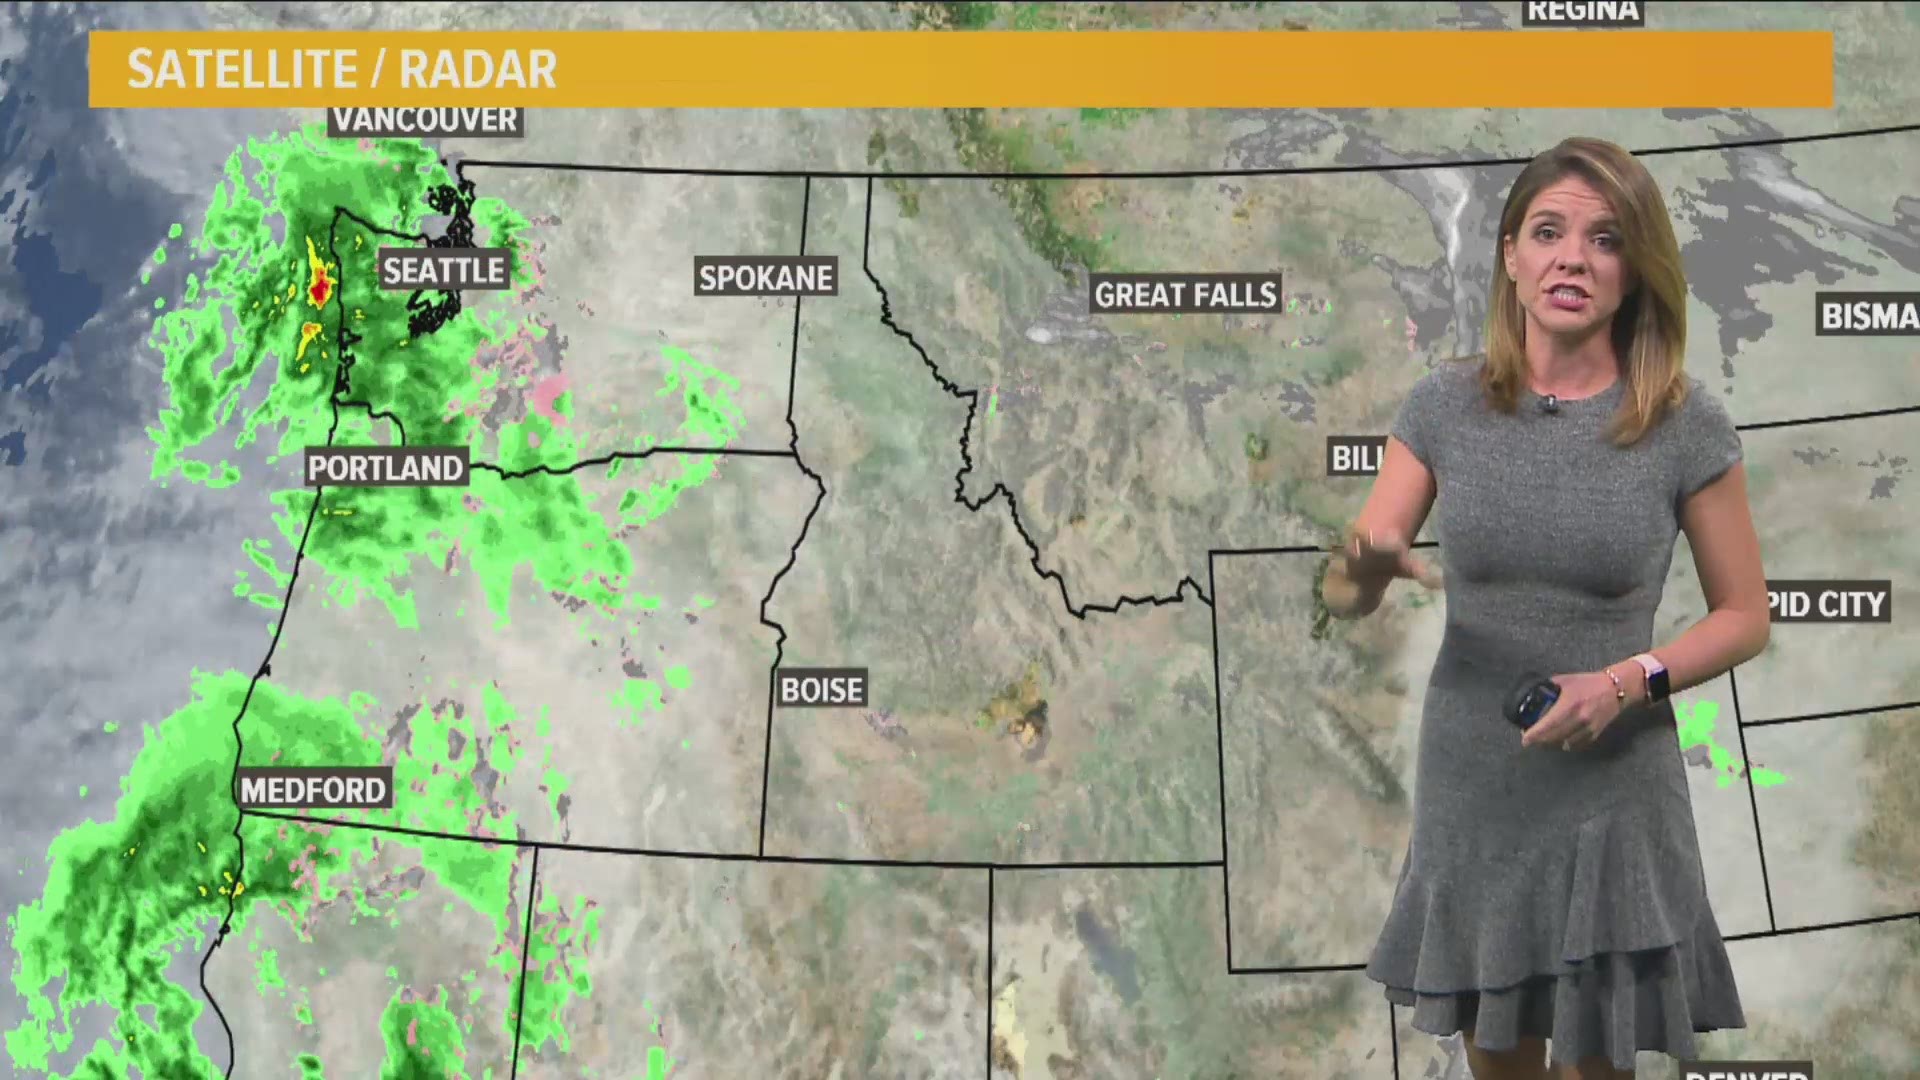 Bri Eggers says there will be rain and mild conditions for the valley with snow in the mountains.